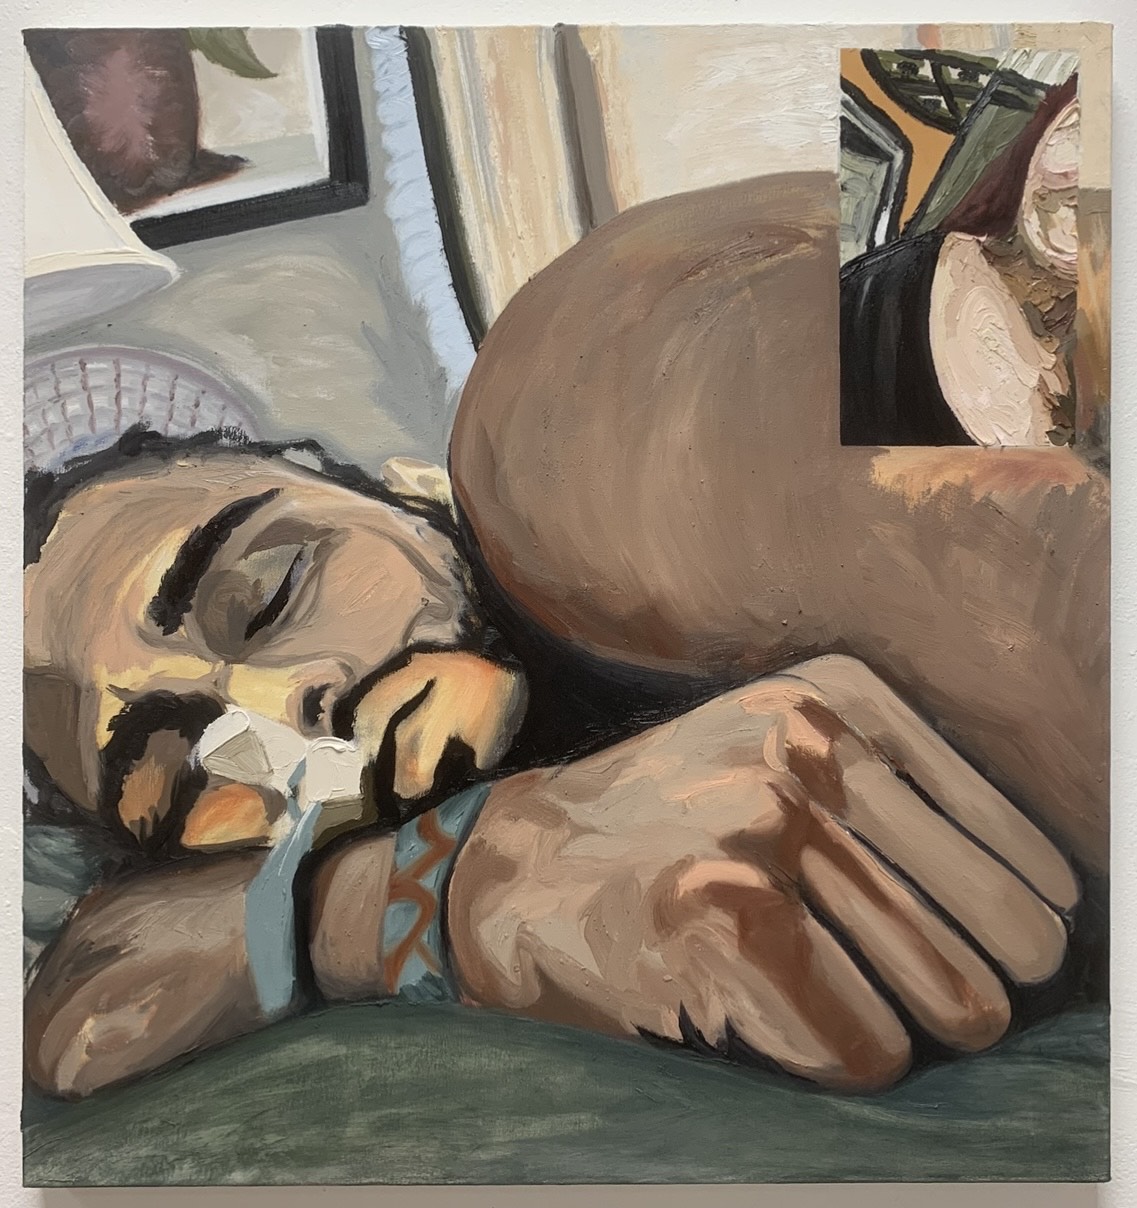 Image in the format of a facetime call. A man is sleeping while an abstracted woman is in the upper right corner